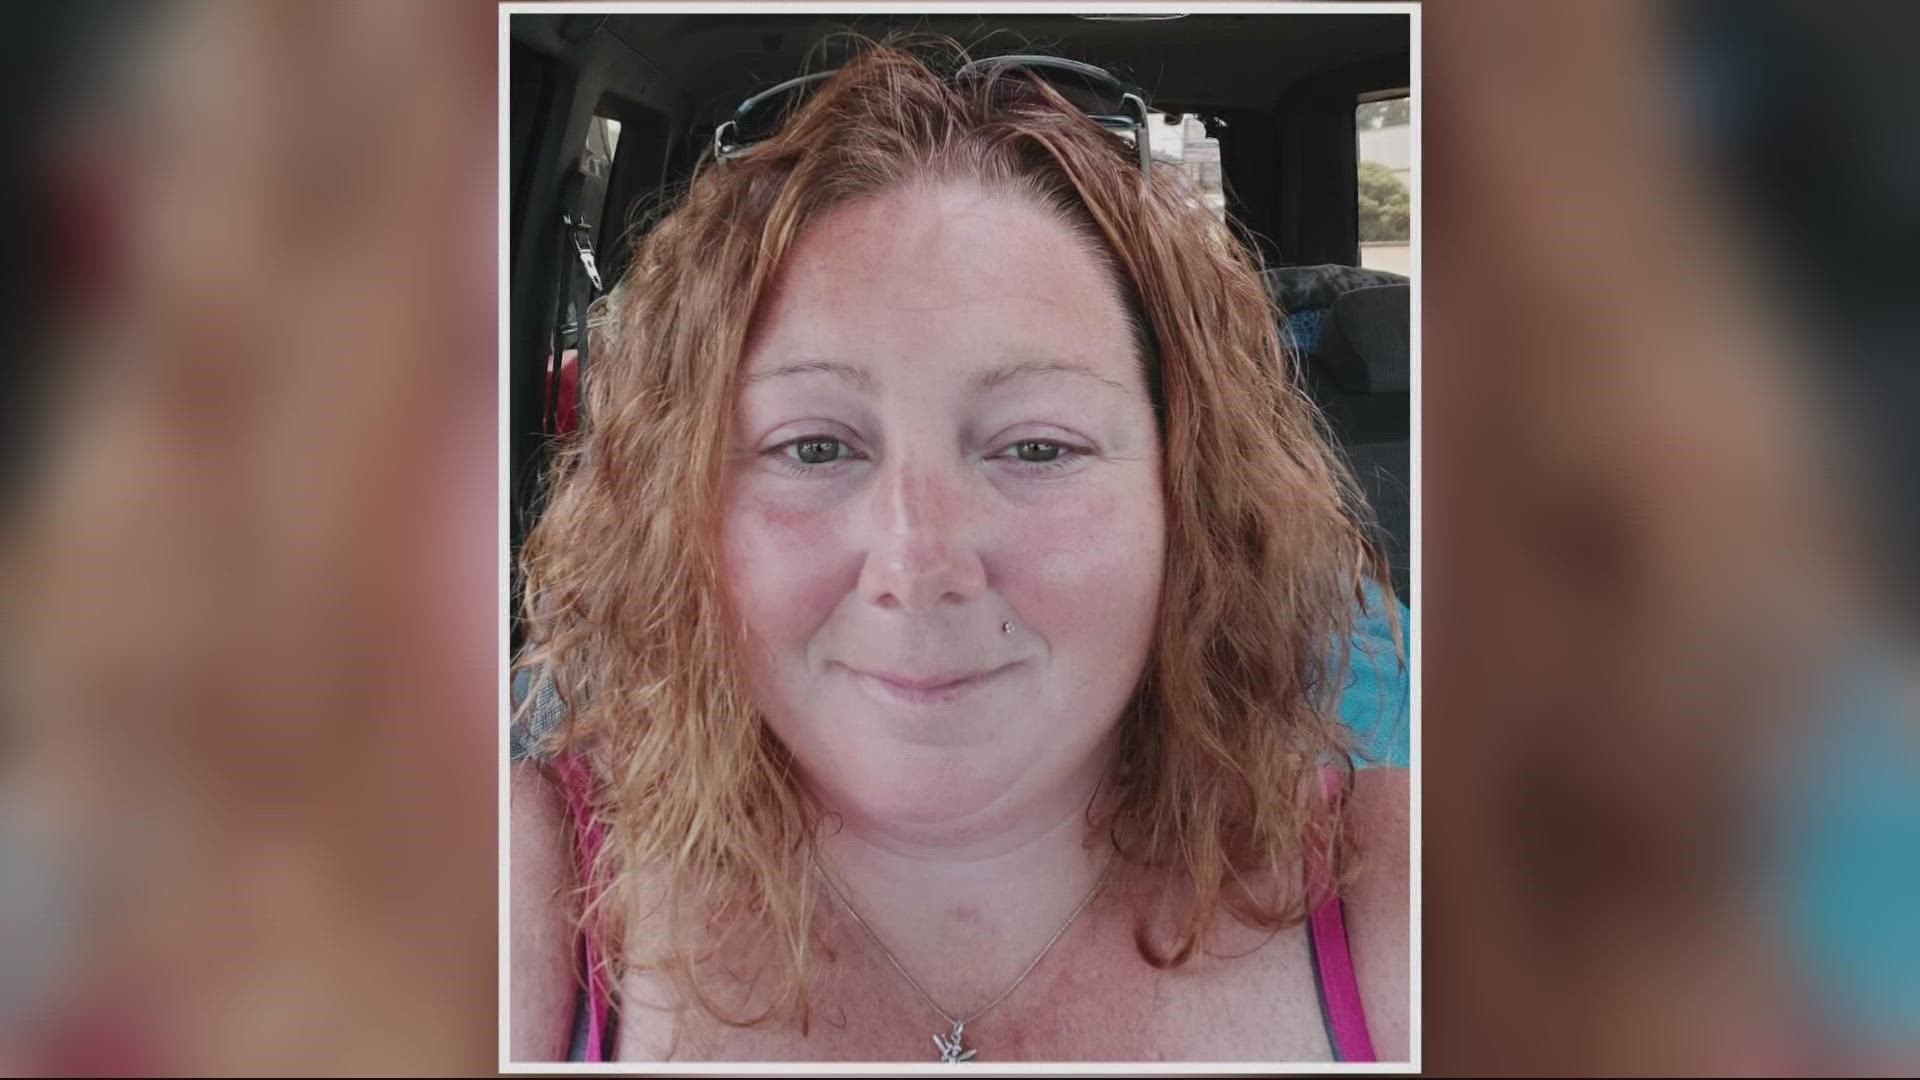 Billie Jo Hooton was a crew member on the ship that went down off the coast of Florence. Her family says she was an inspiration to many.